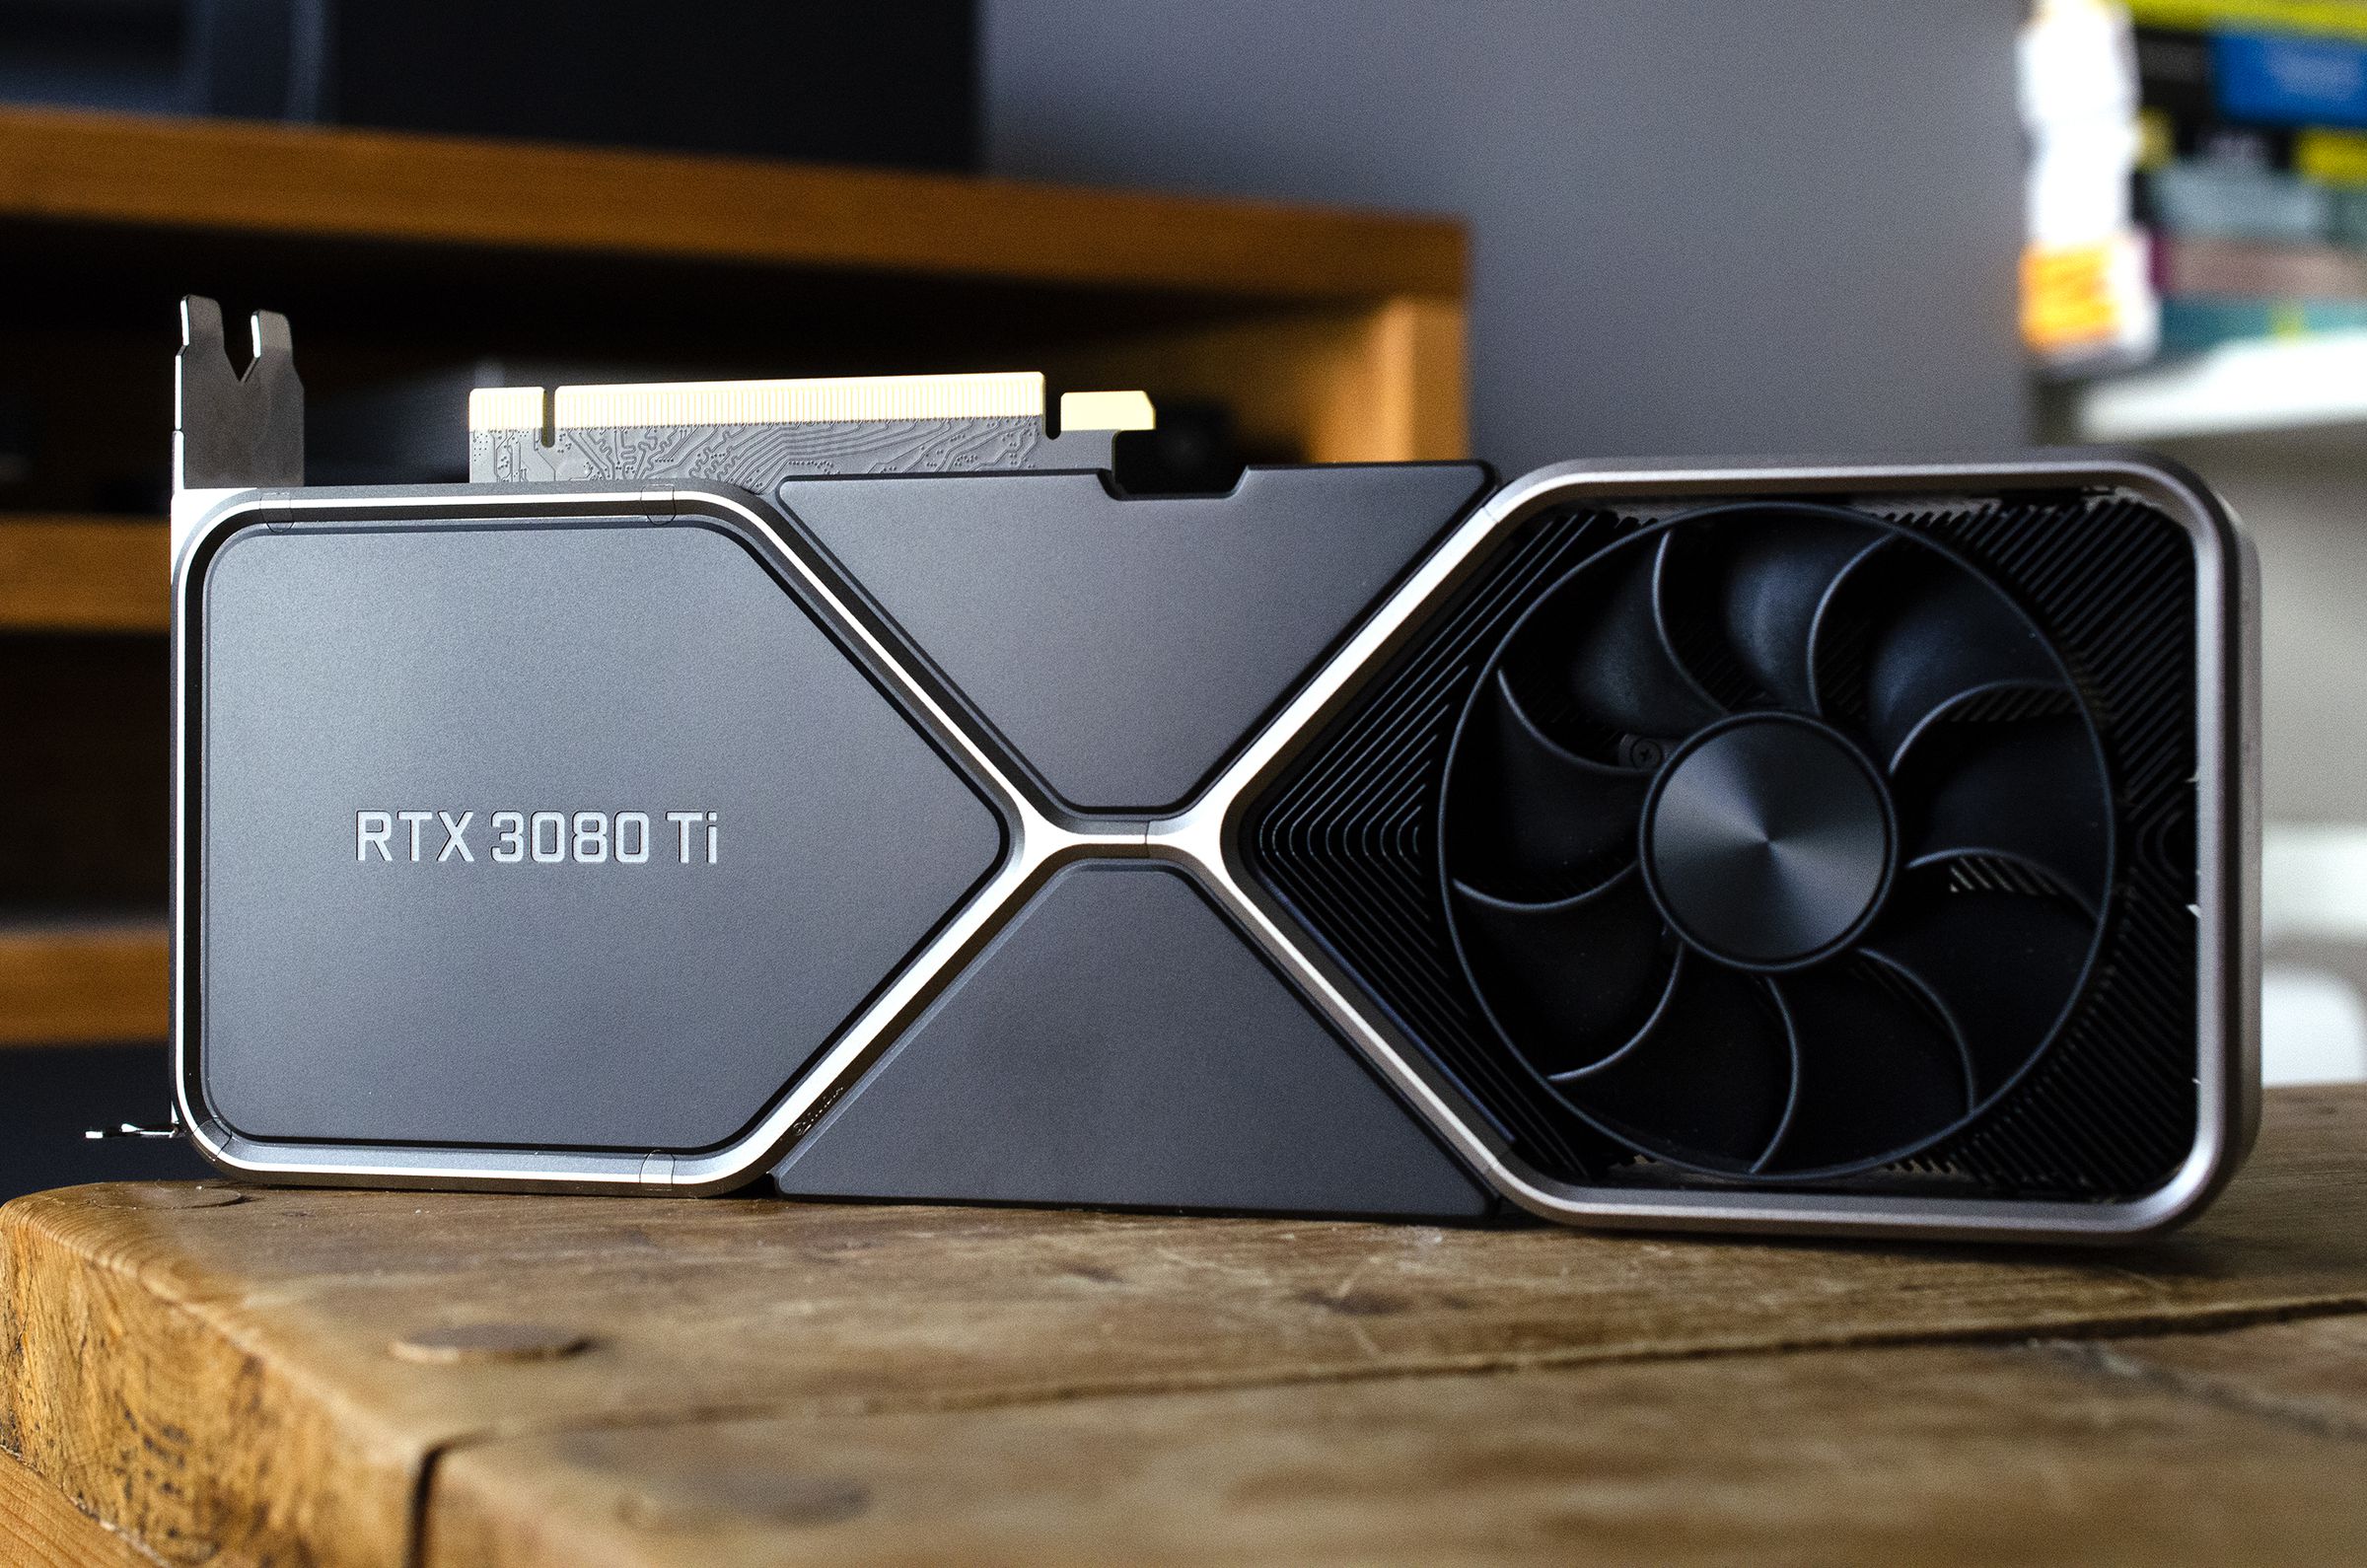 The Founders Edition RTX 3080 Ti has a retail price of 1,199.99, but the lowest price at StockX is currently $1,778.